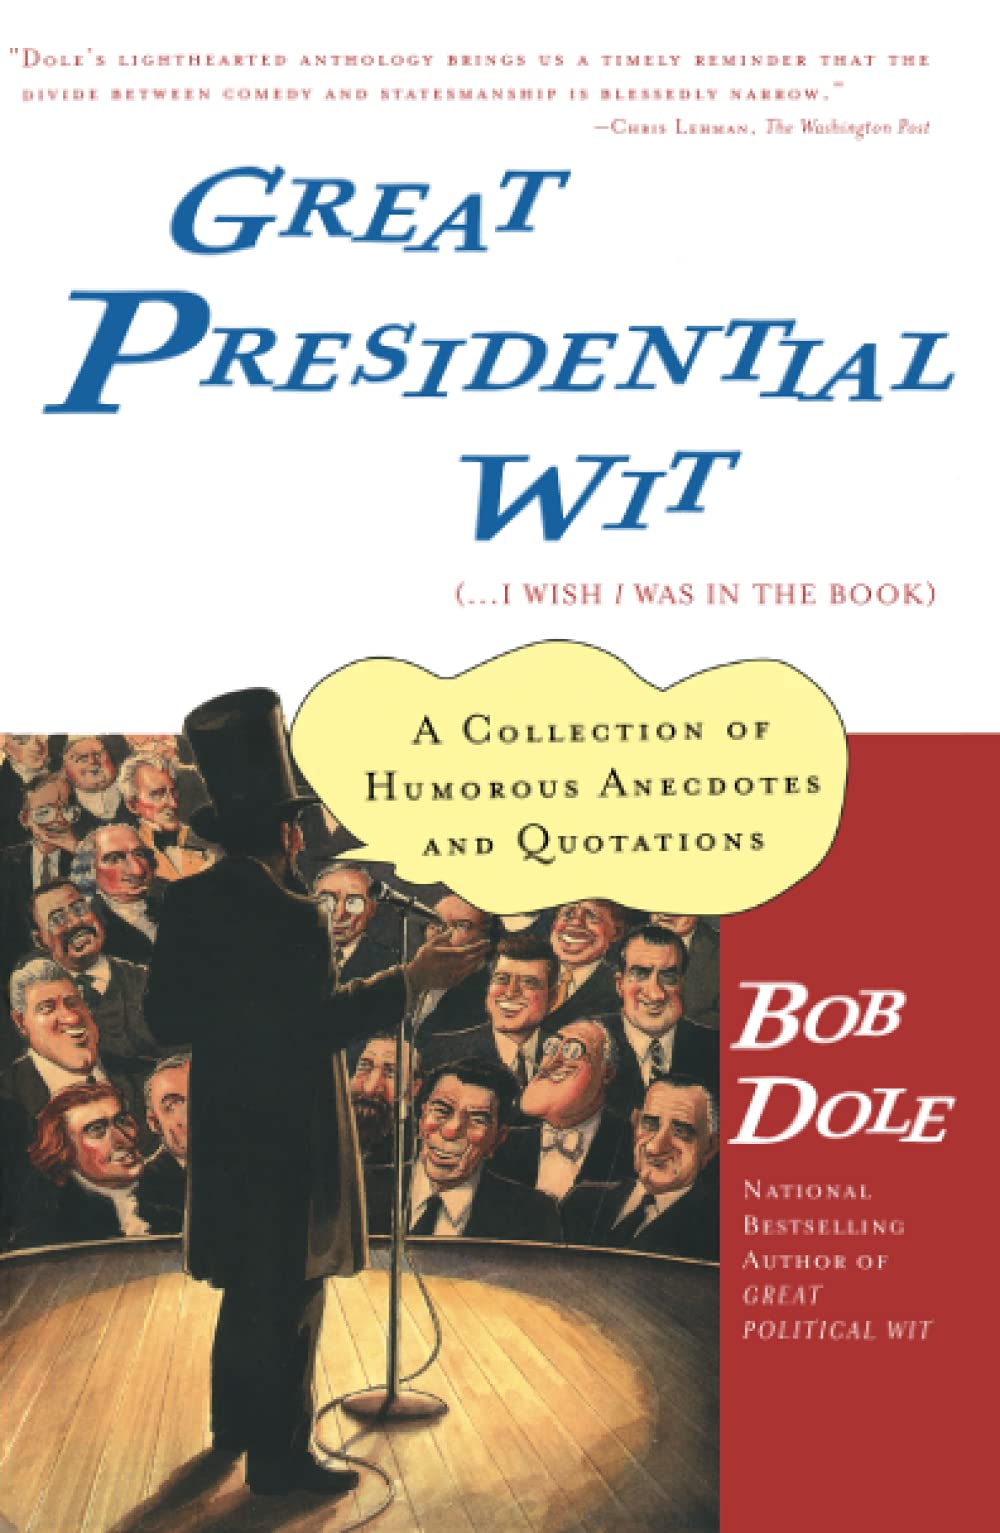 Bob Dole's Great Presidential Wit with illustrated presidents